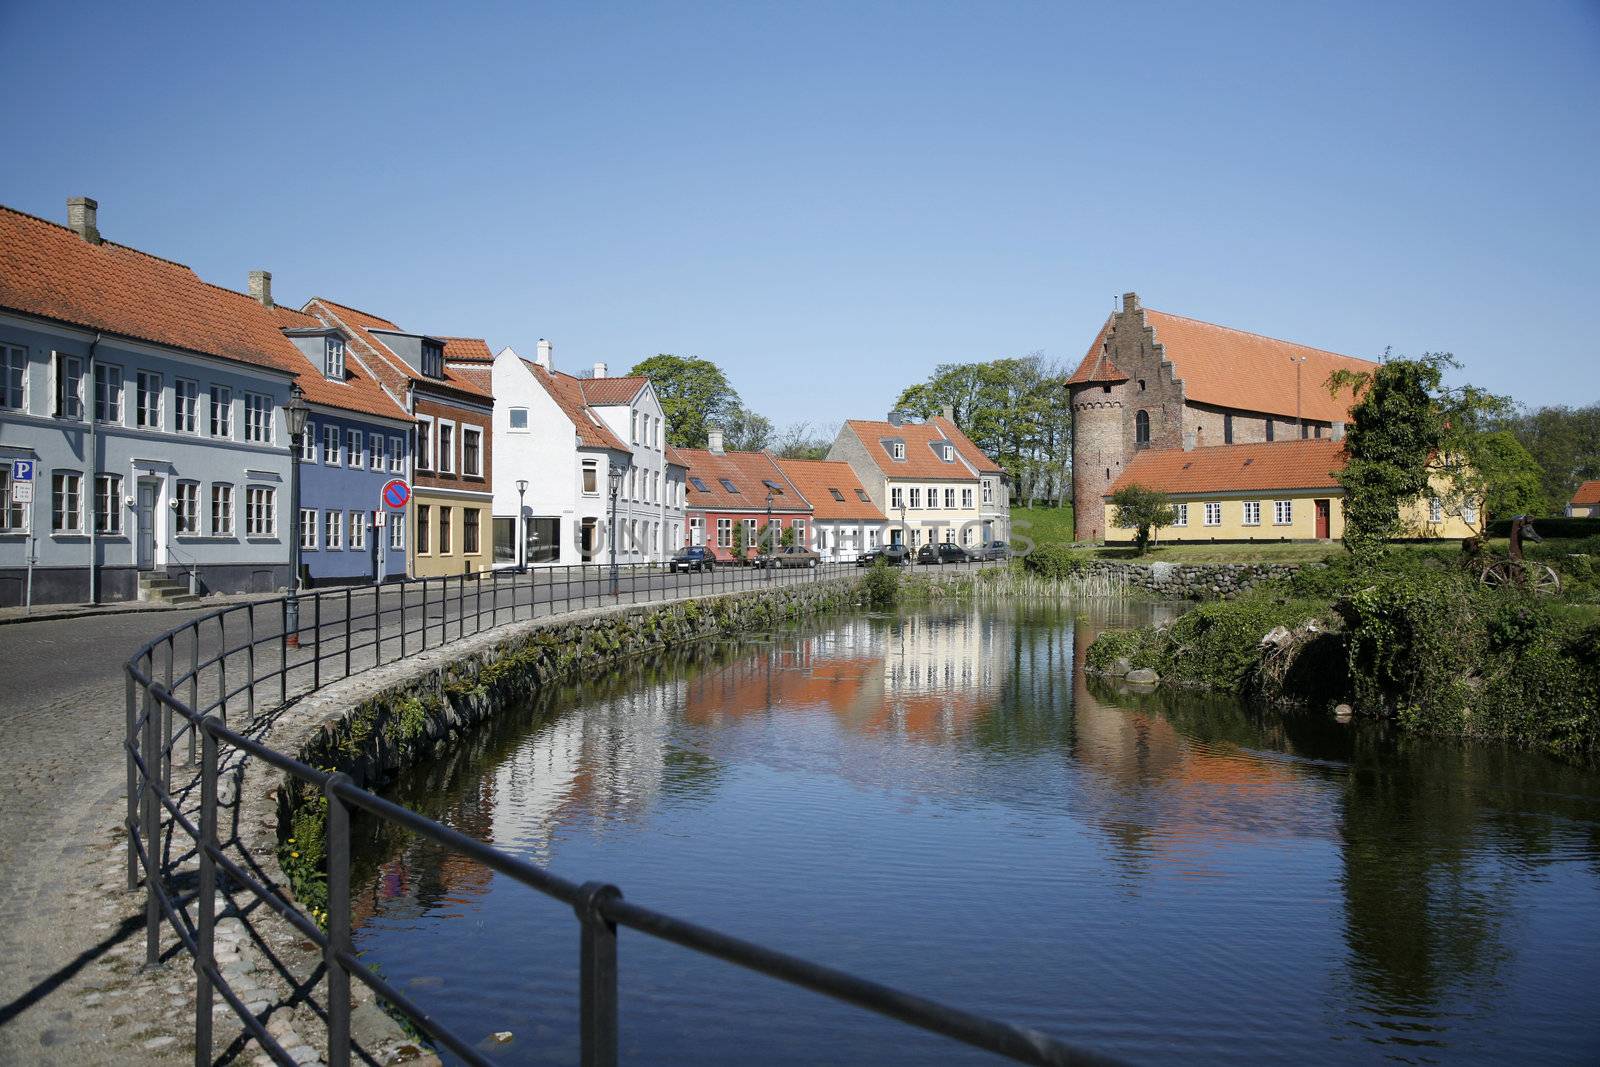 Beautiful old houses along the moat. The more than 800 years old Nyborg Castle in the background